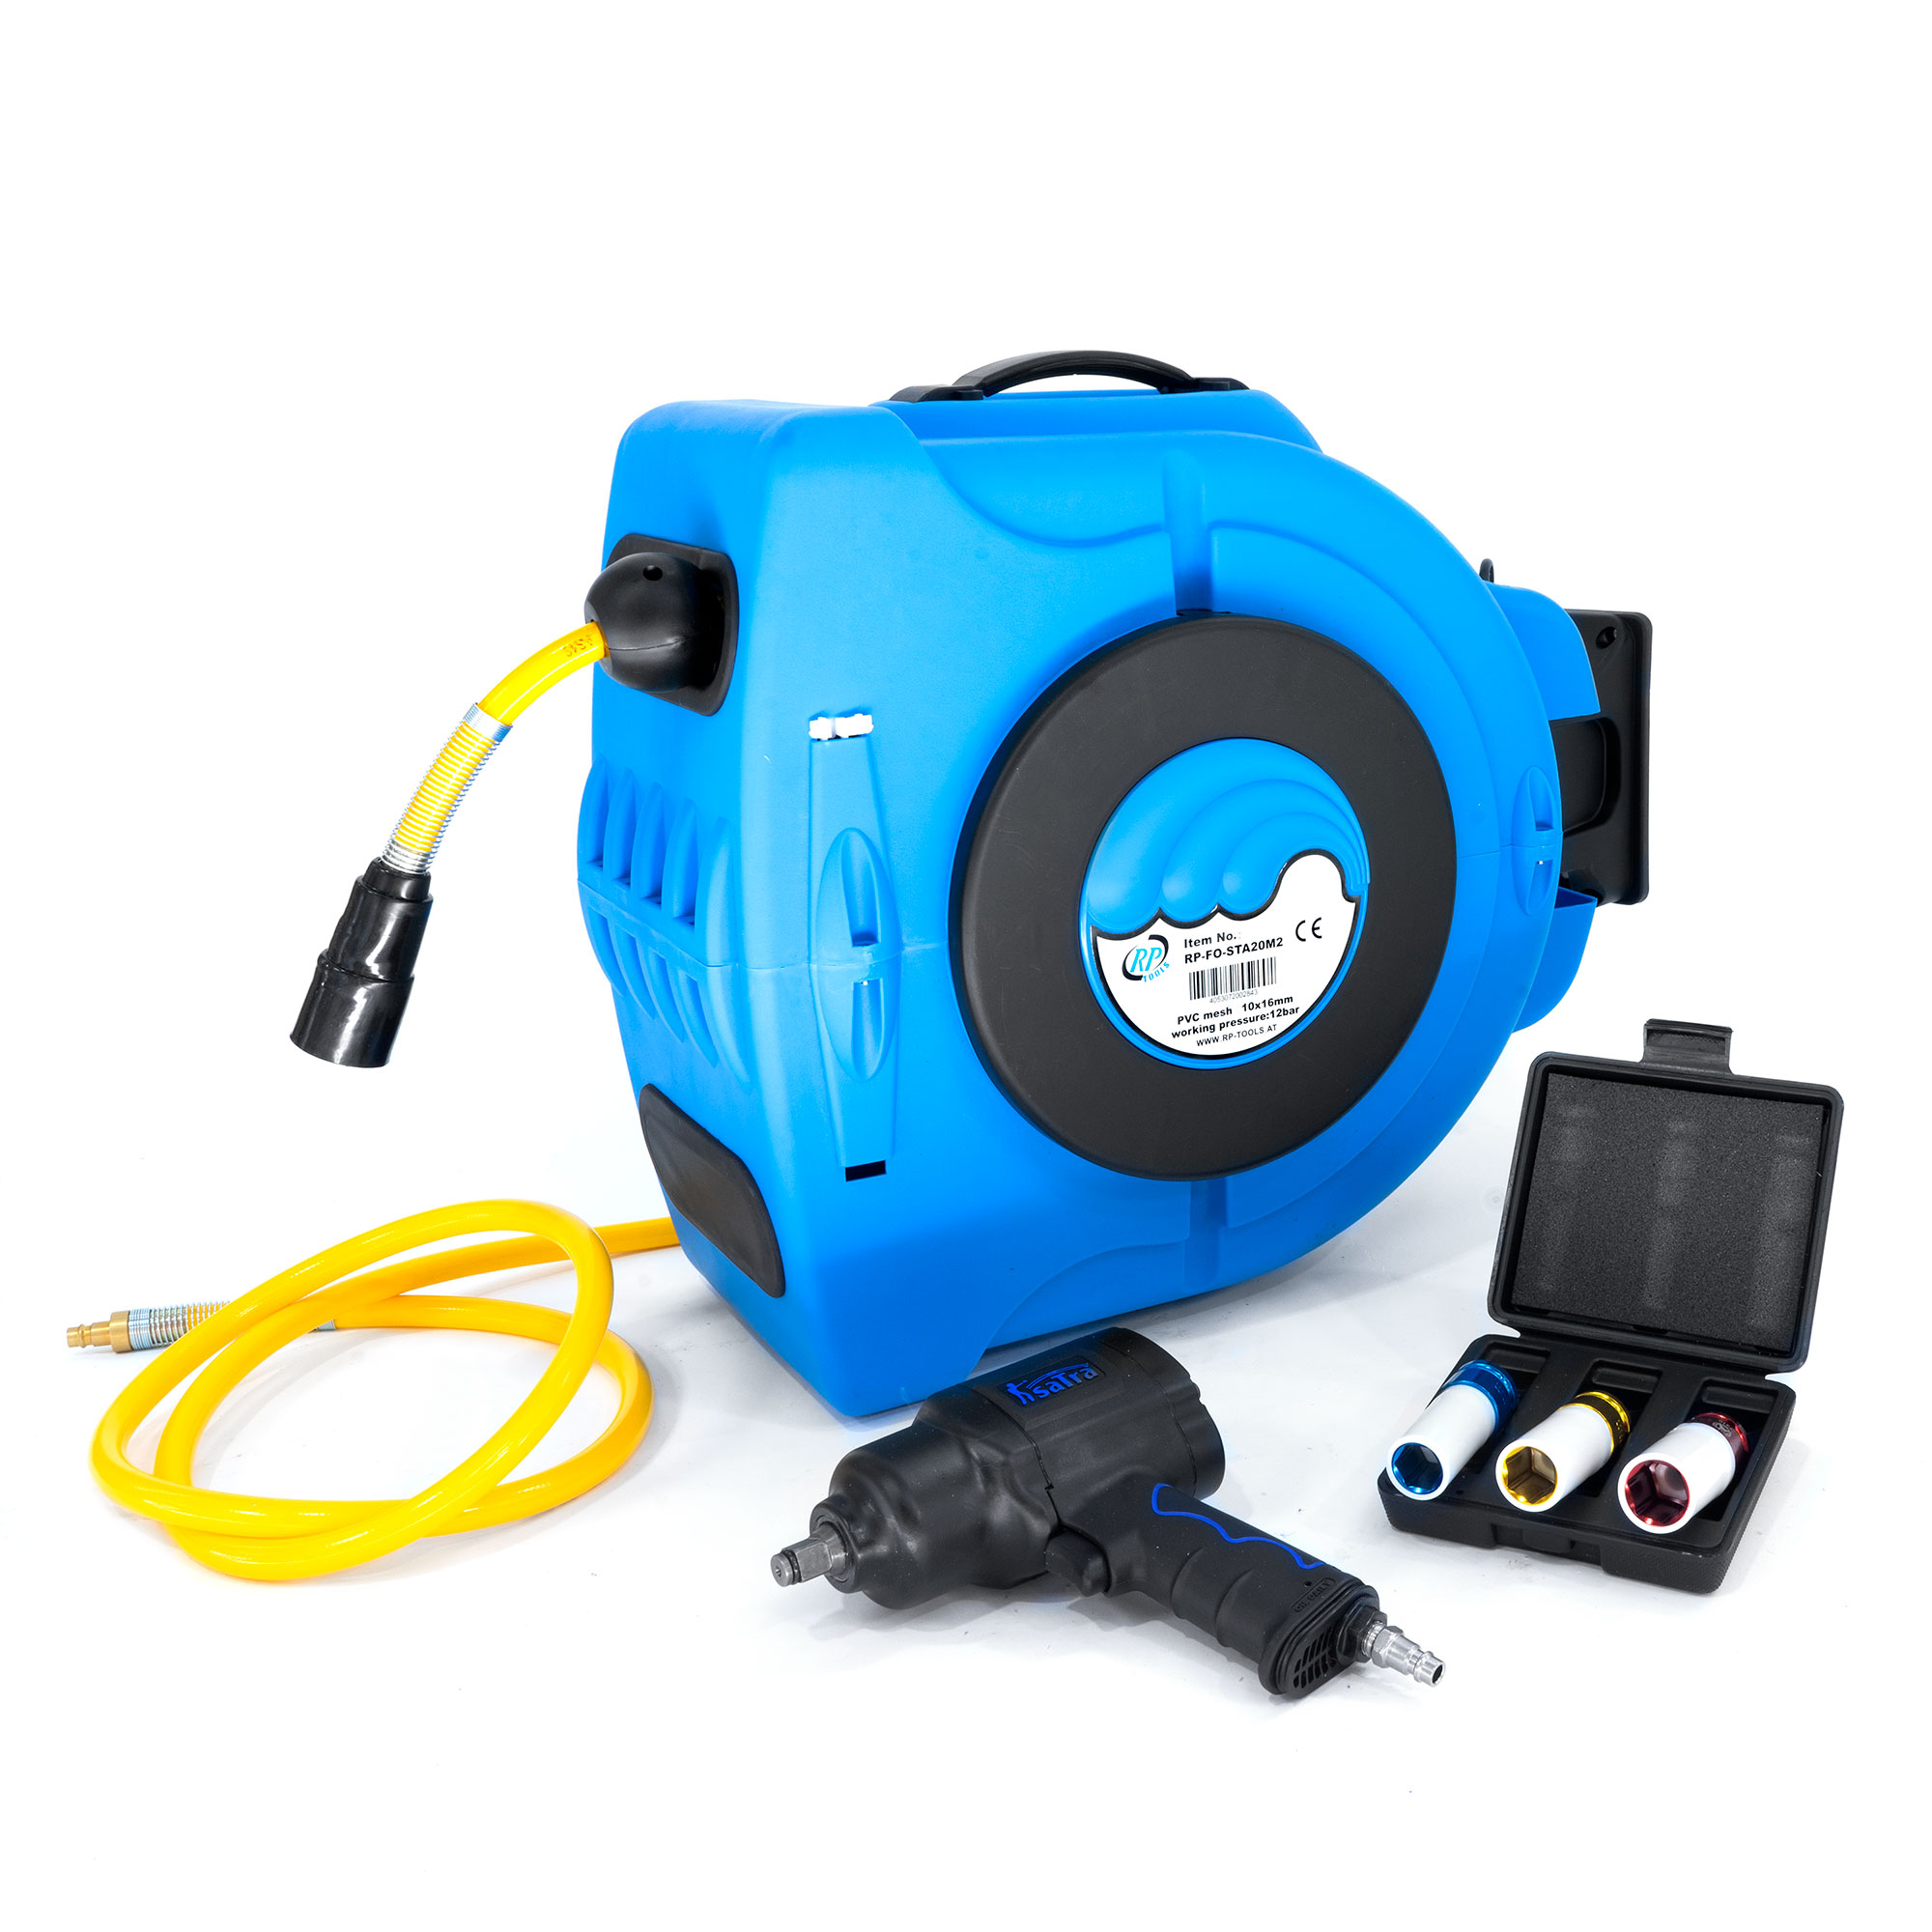 https://www.rp-tools.com/media/image/product/59193/lg/rp-uni-set-0003-set_compressed-air-industrial-hose-reel-20-m-incl-compressed-air-impact-wrench-1-2inch-1500nm-and-power-sparing-insert-set-super-deal.jpg